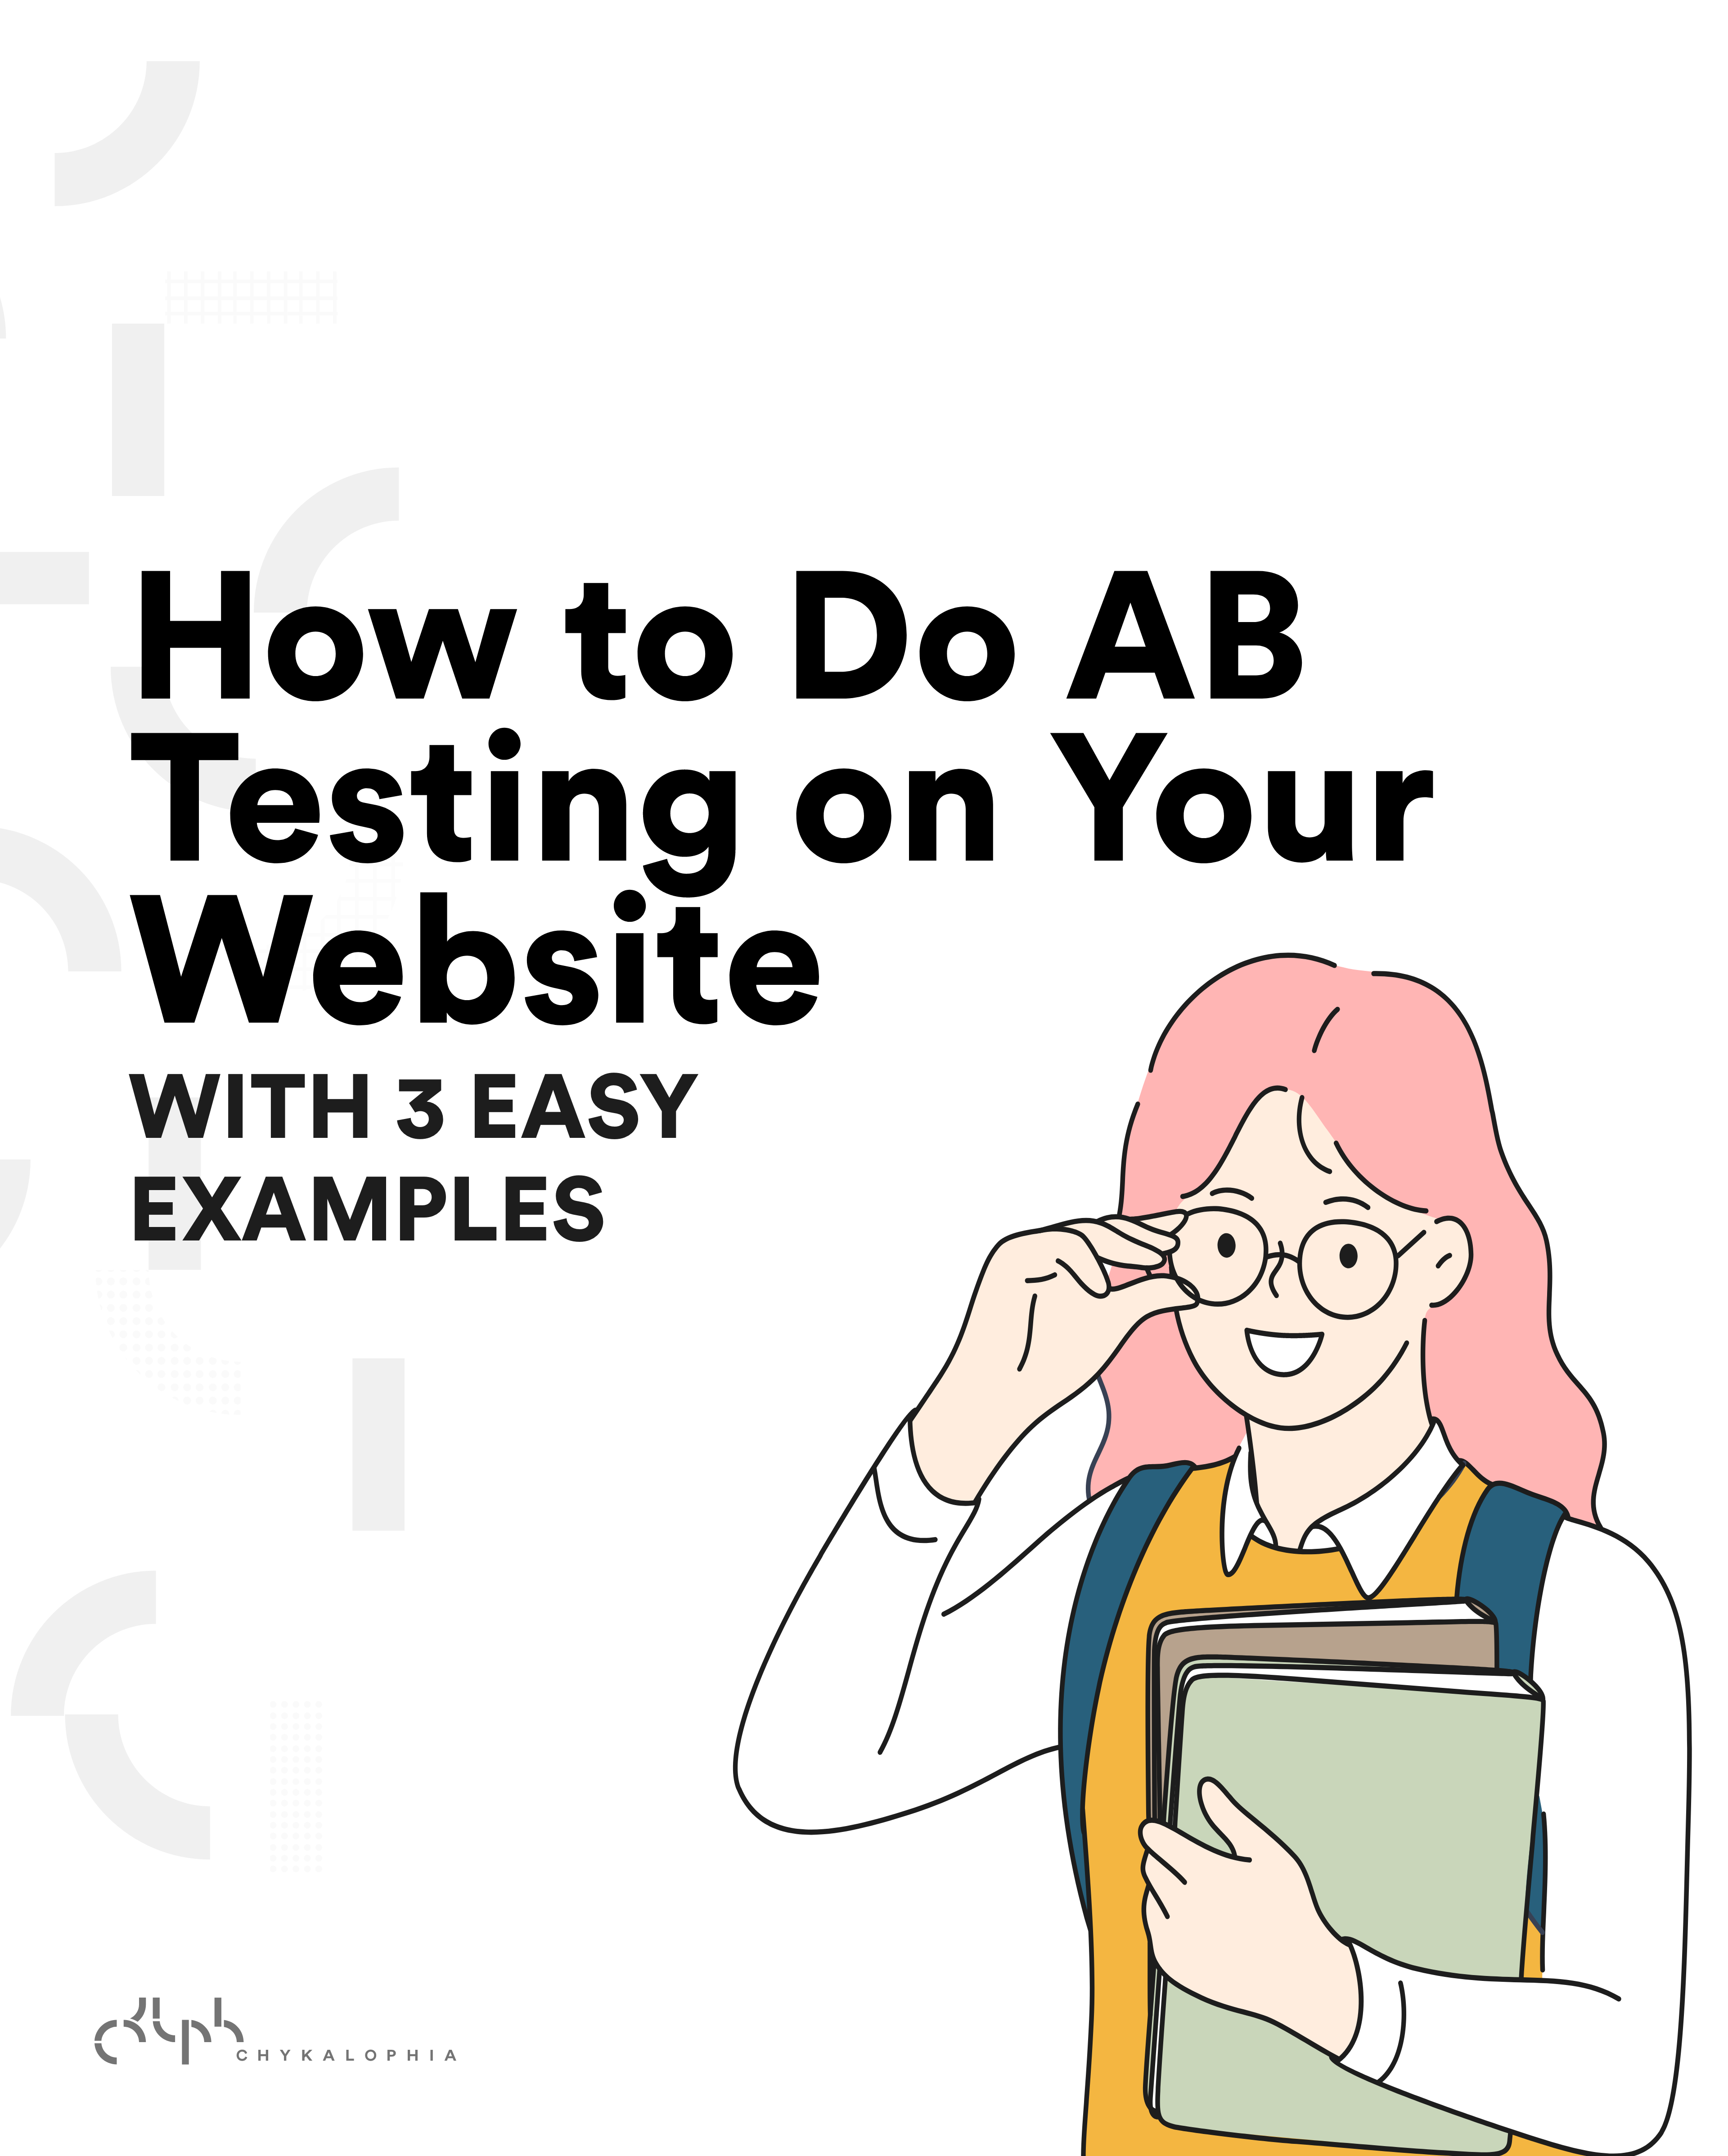 How to do AB testing on website